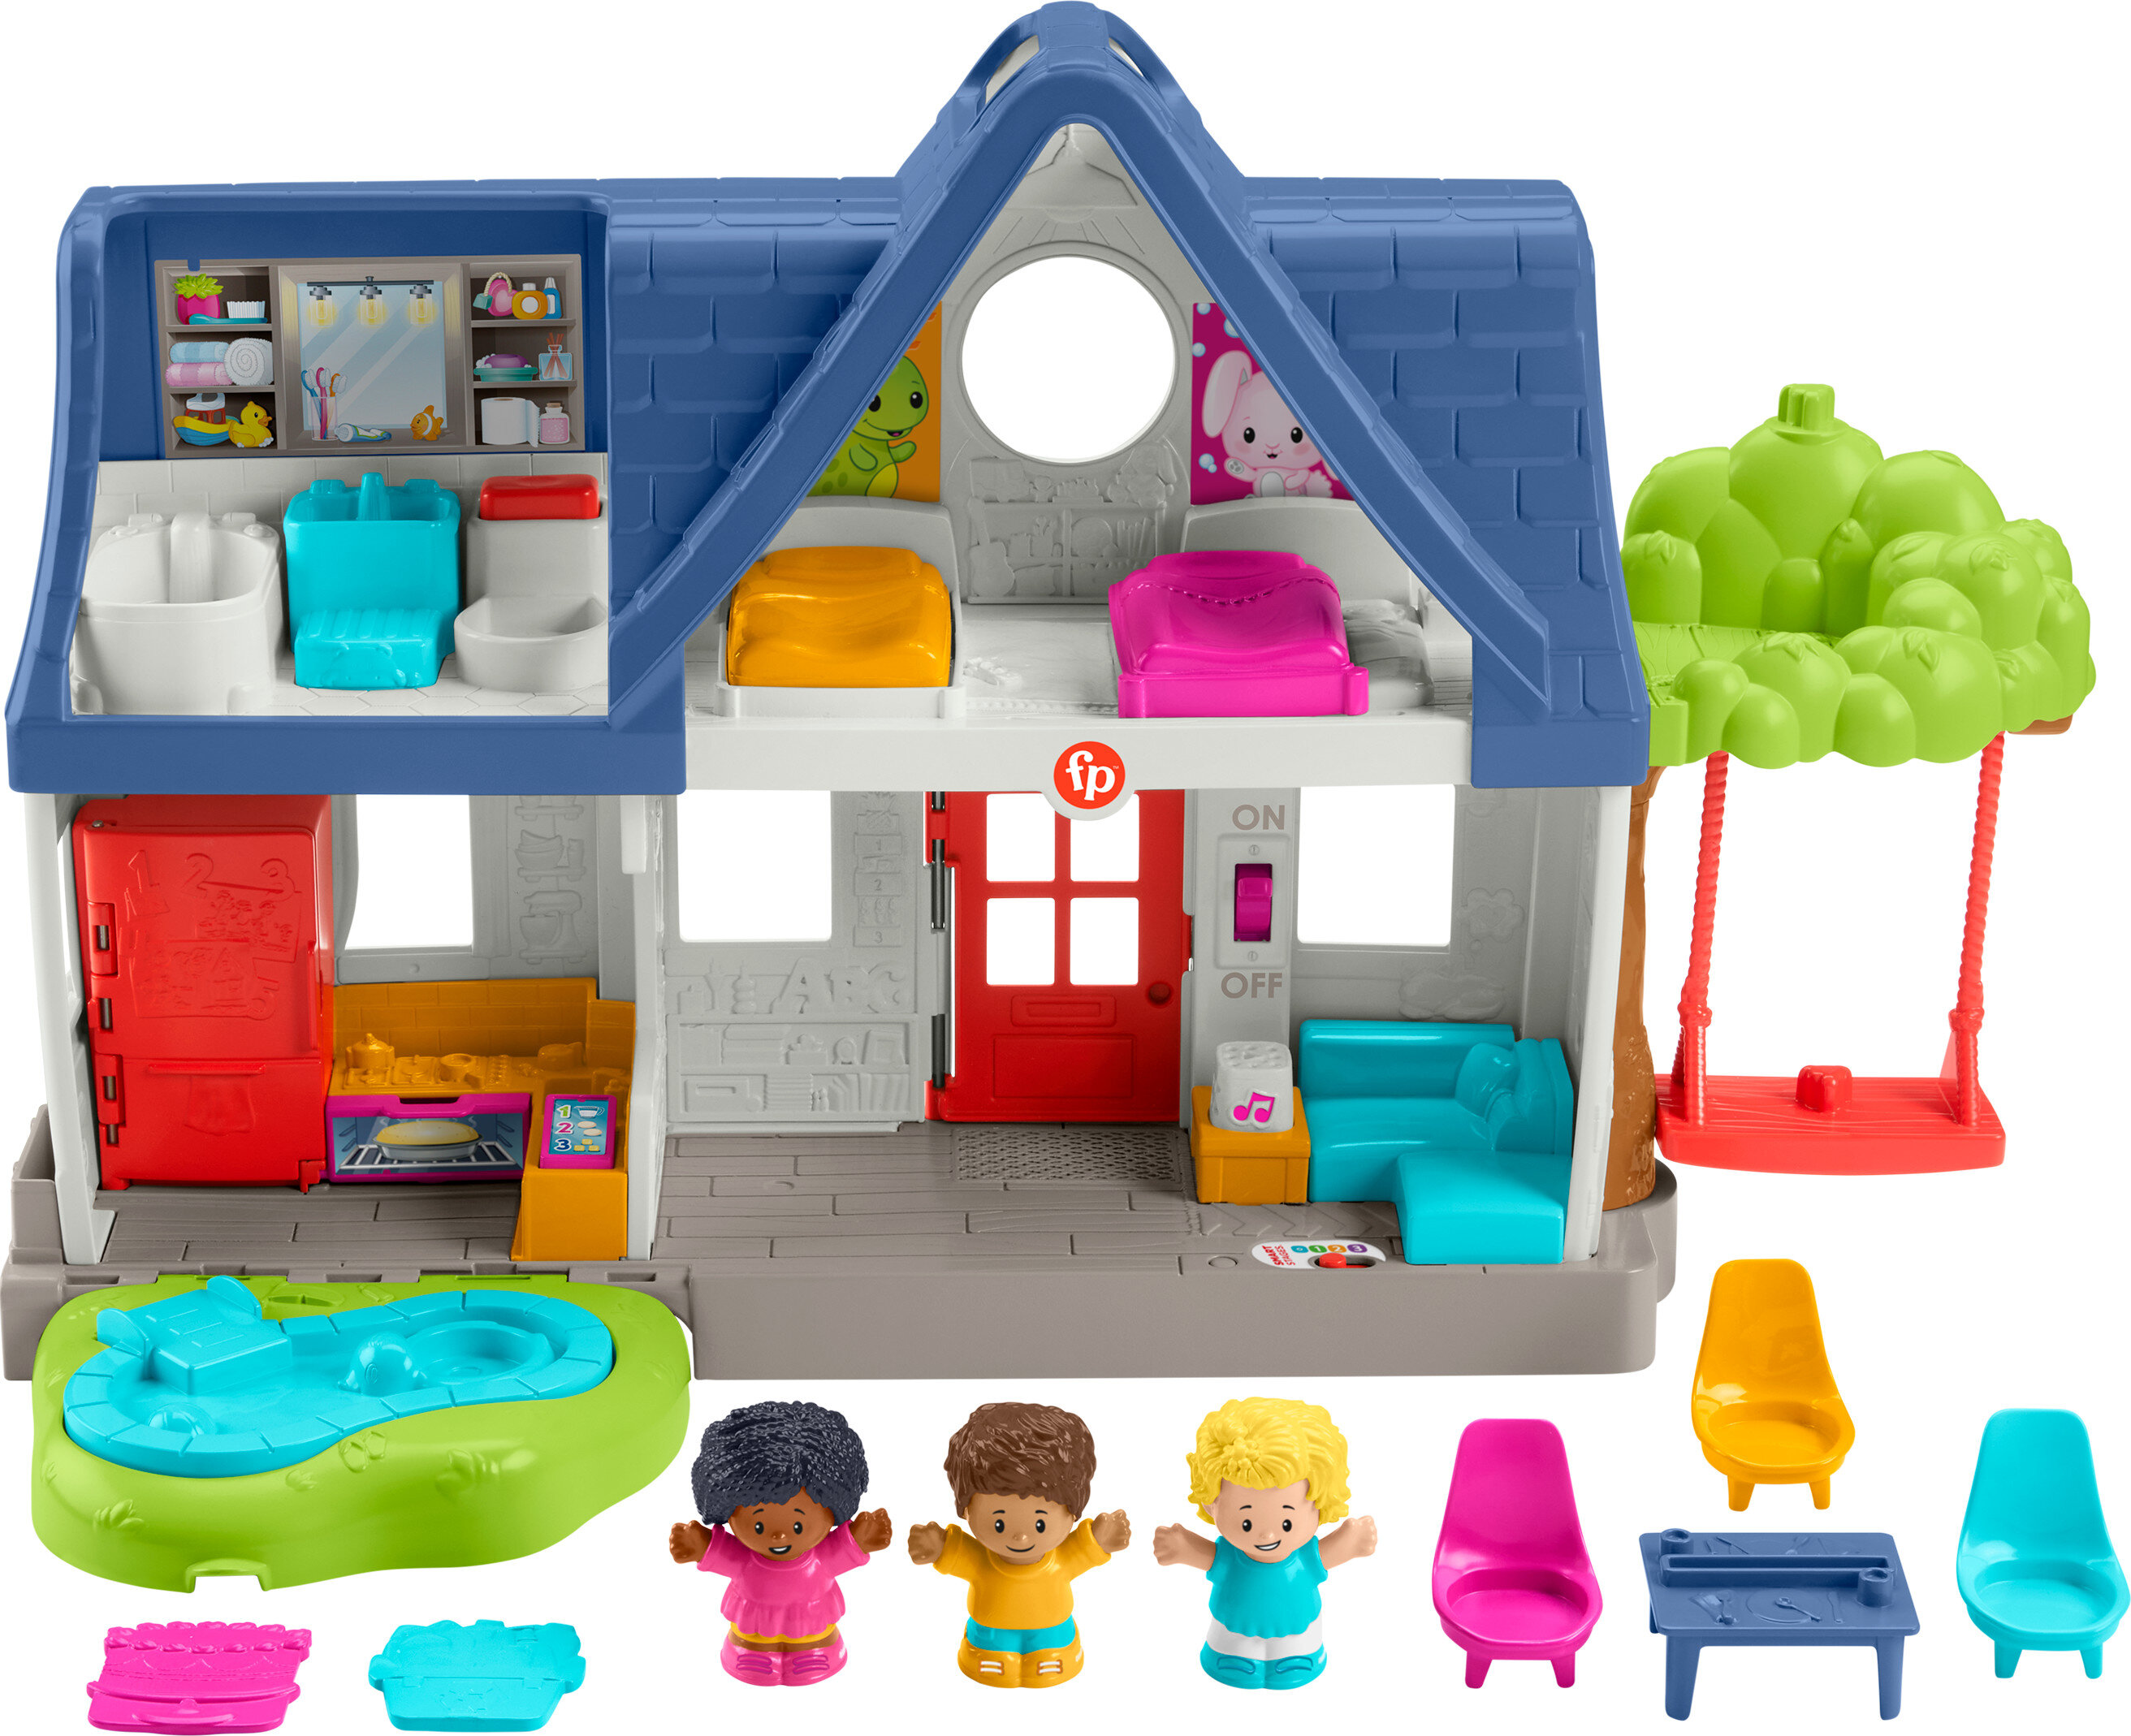 Fisher-Price Little People Friends Together Play House Toddler Learning Playset, 10 Pieces - image 1 of 7